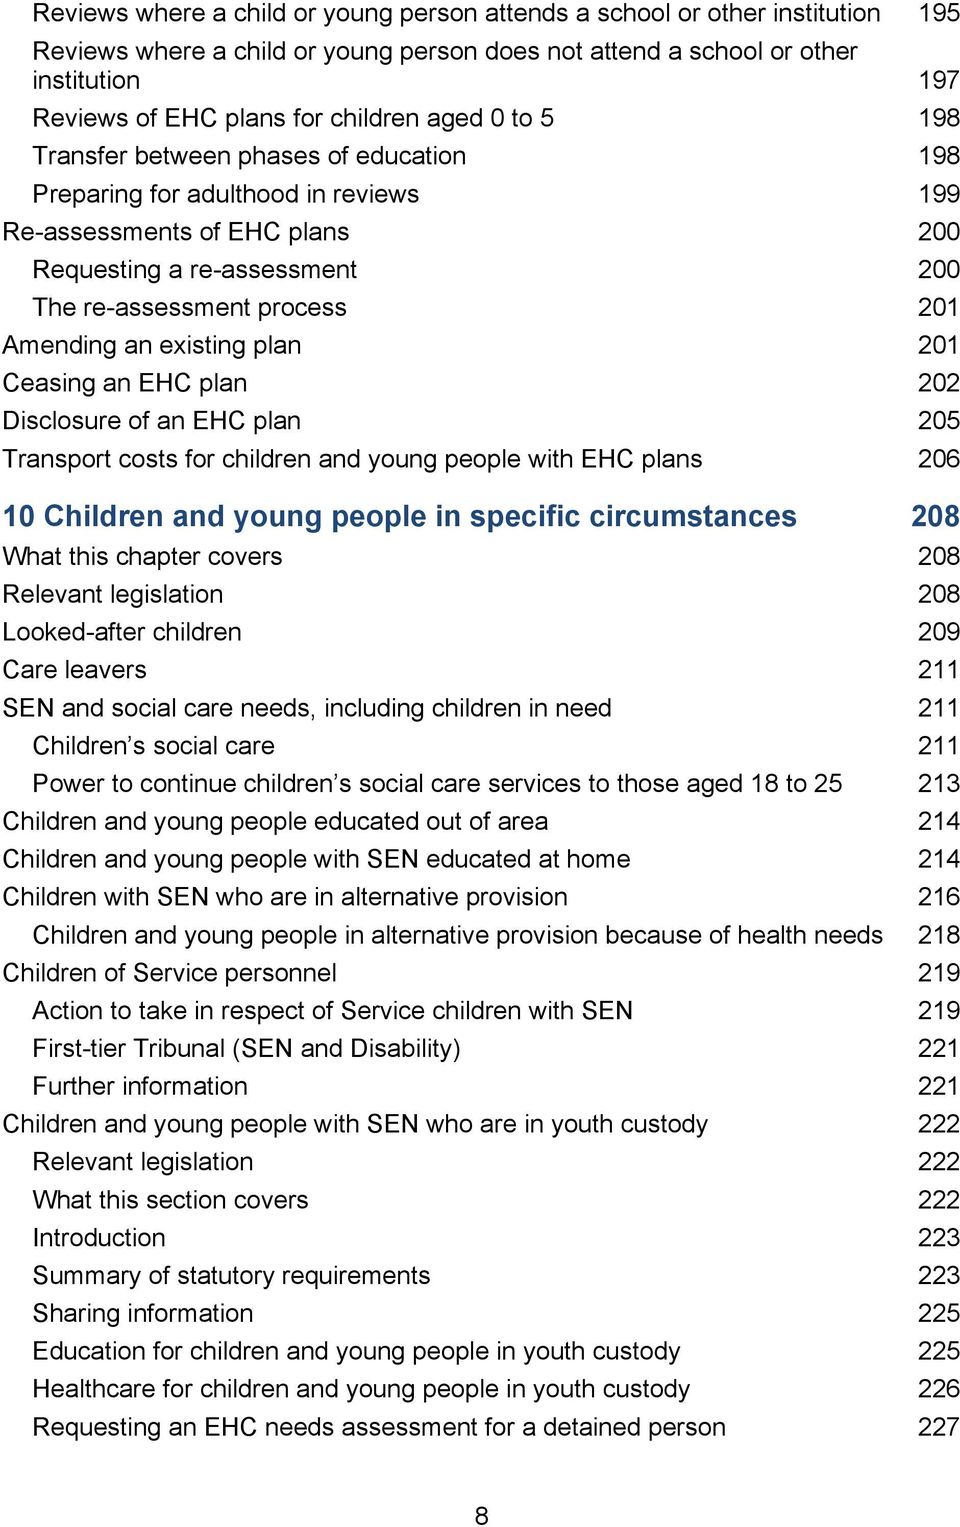 Amending an existing plan 201 Ceasing an EHC plan 202 Disclosure of an EHC plan 205 Transport costs for children and young people with EHC plans 206 10 Children and young people in specific